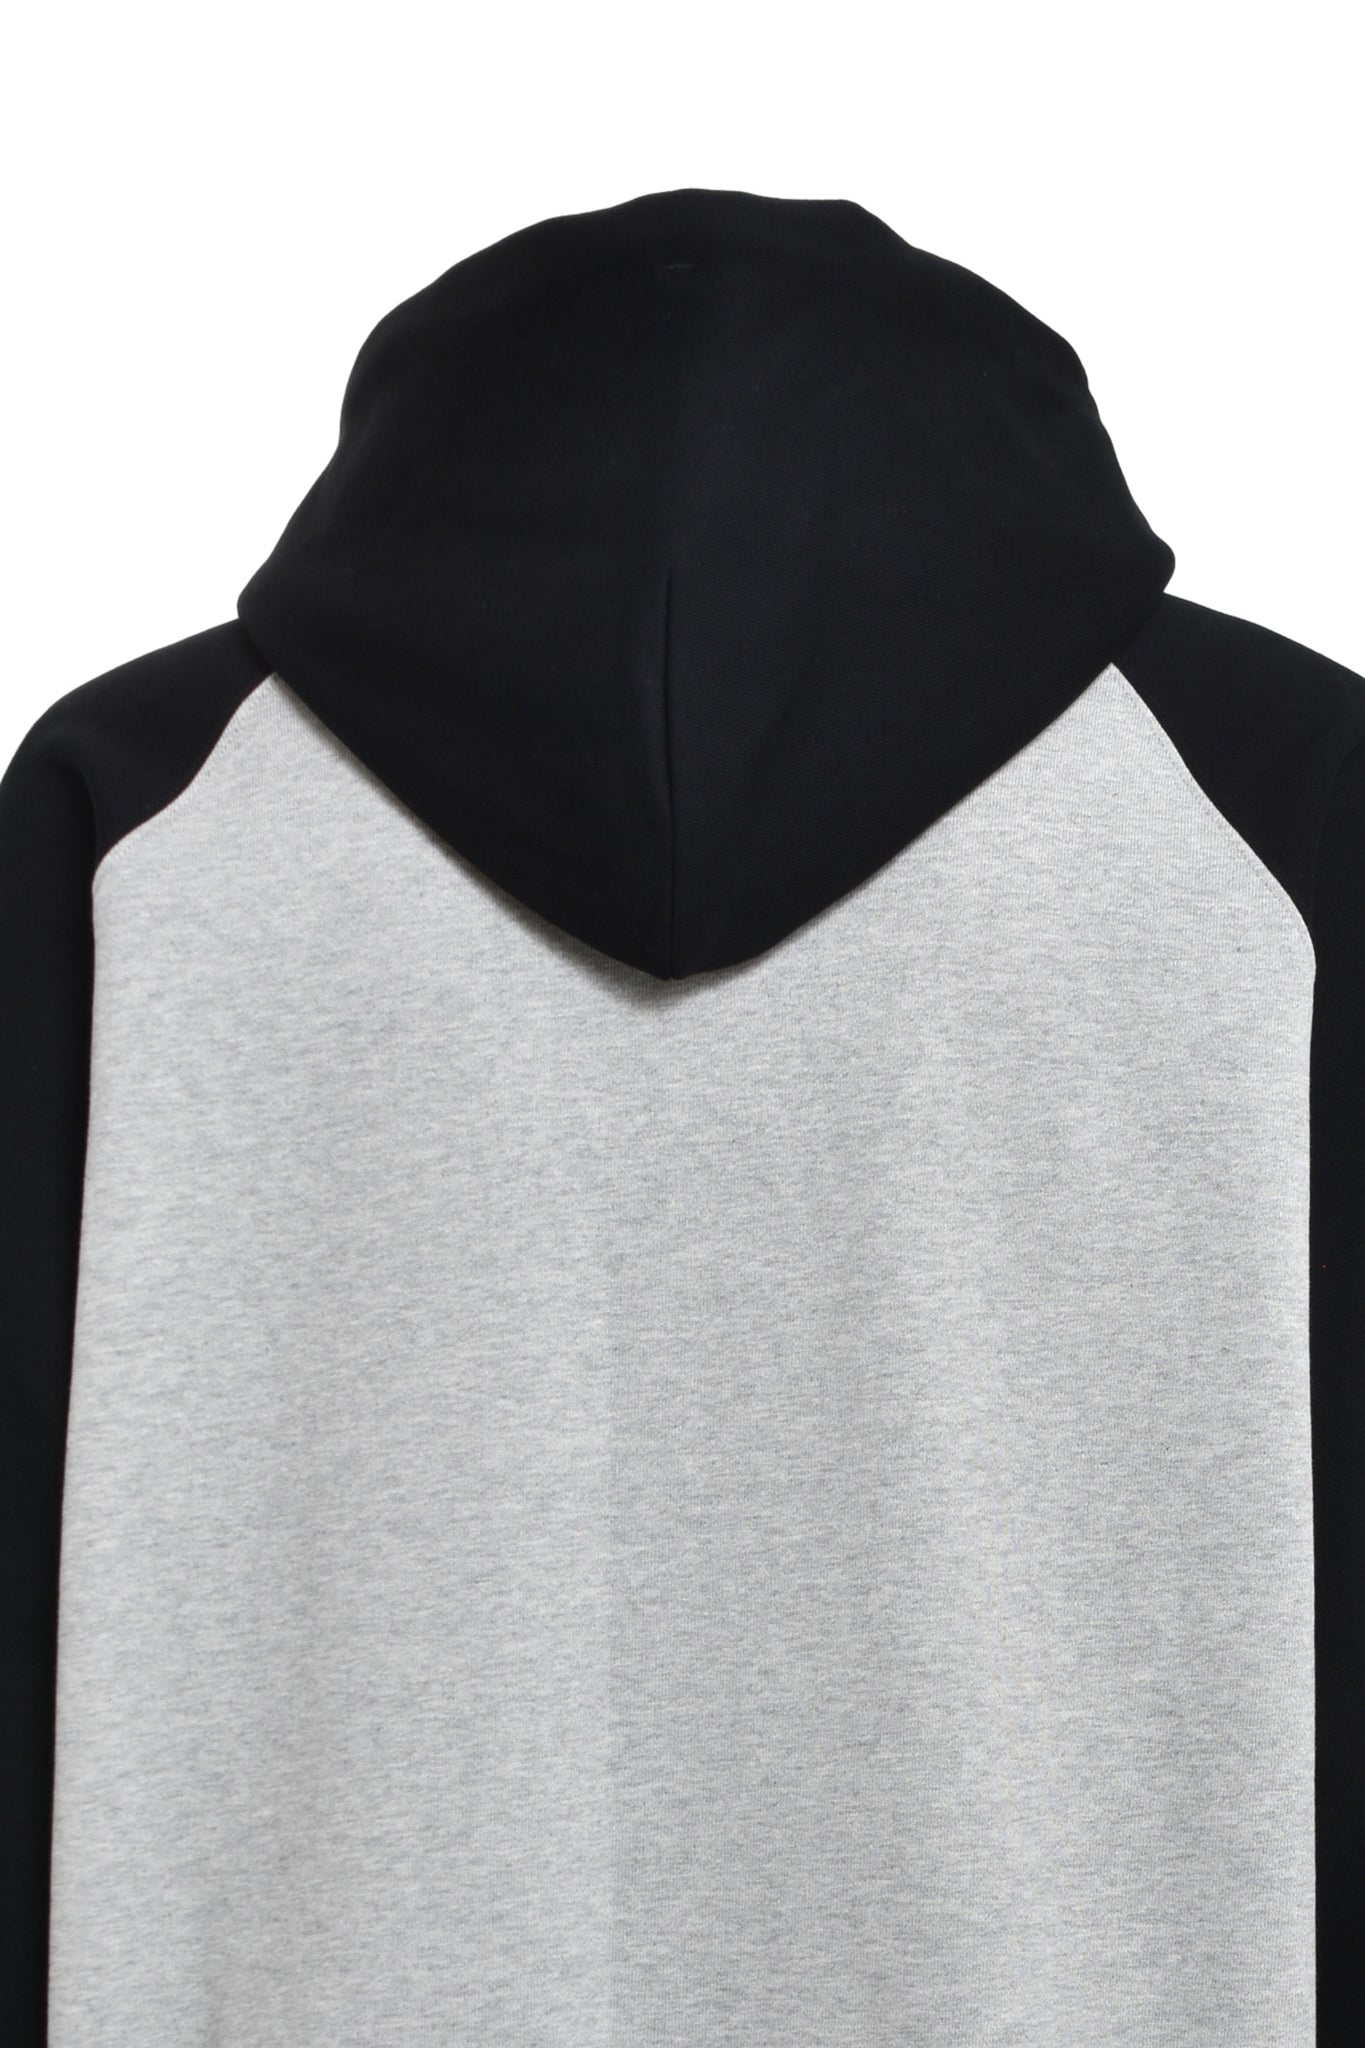 TWO TONE EMBROIDERY HOODIE / BLACK H.GREY